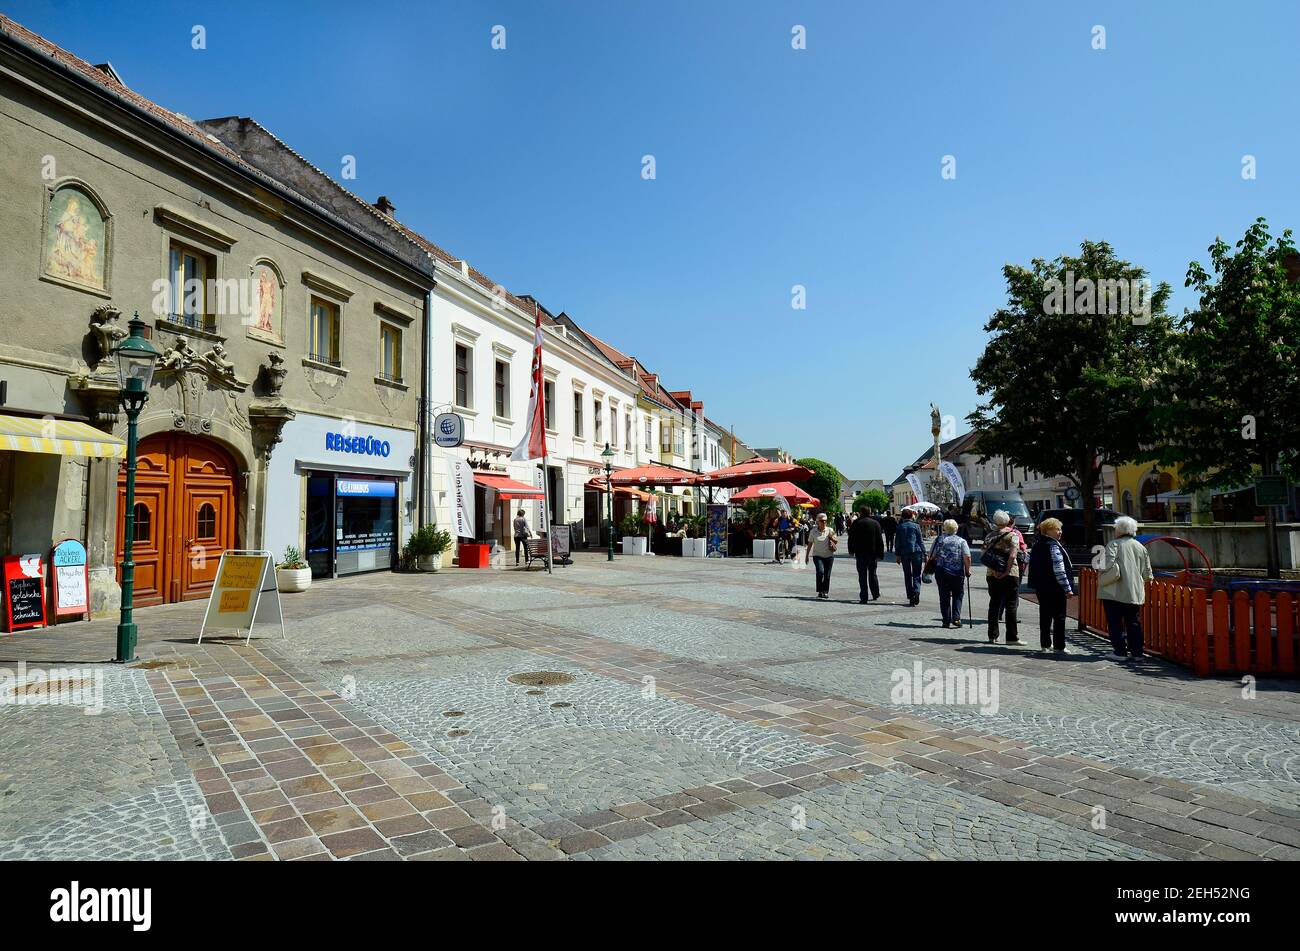 Eisenstadt, Austria - April 30th 2014: Unidentified people in pedestrian area in the capital city of Burgenland Stock Photo